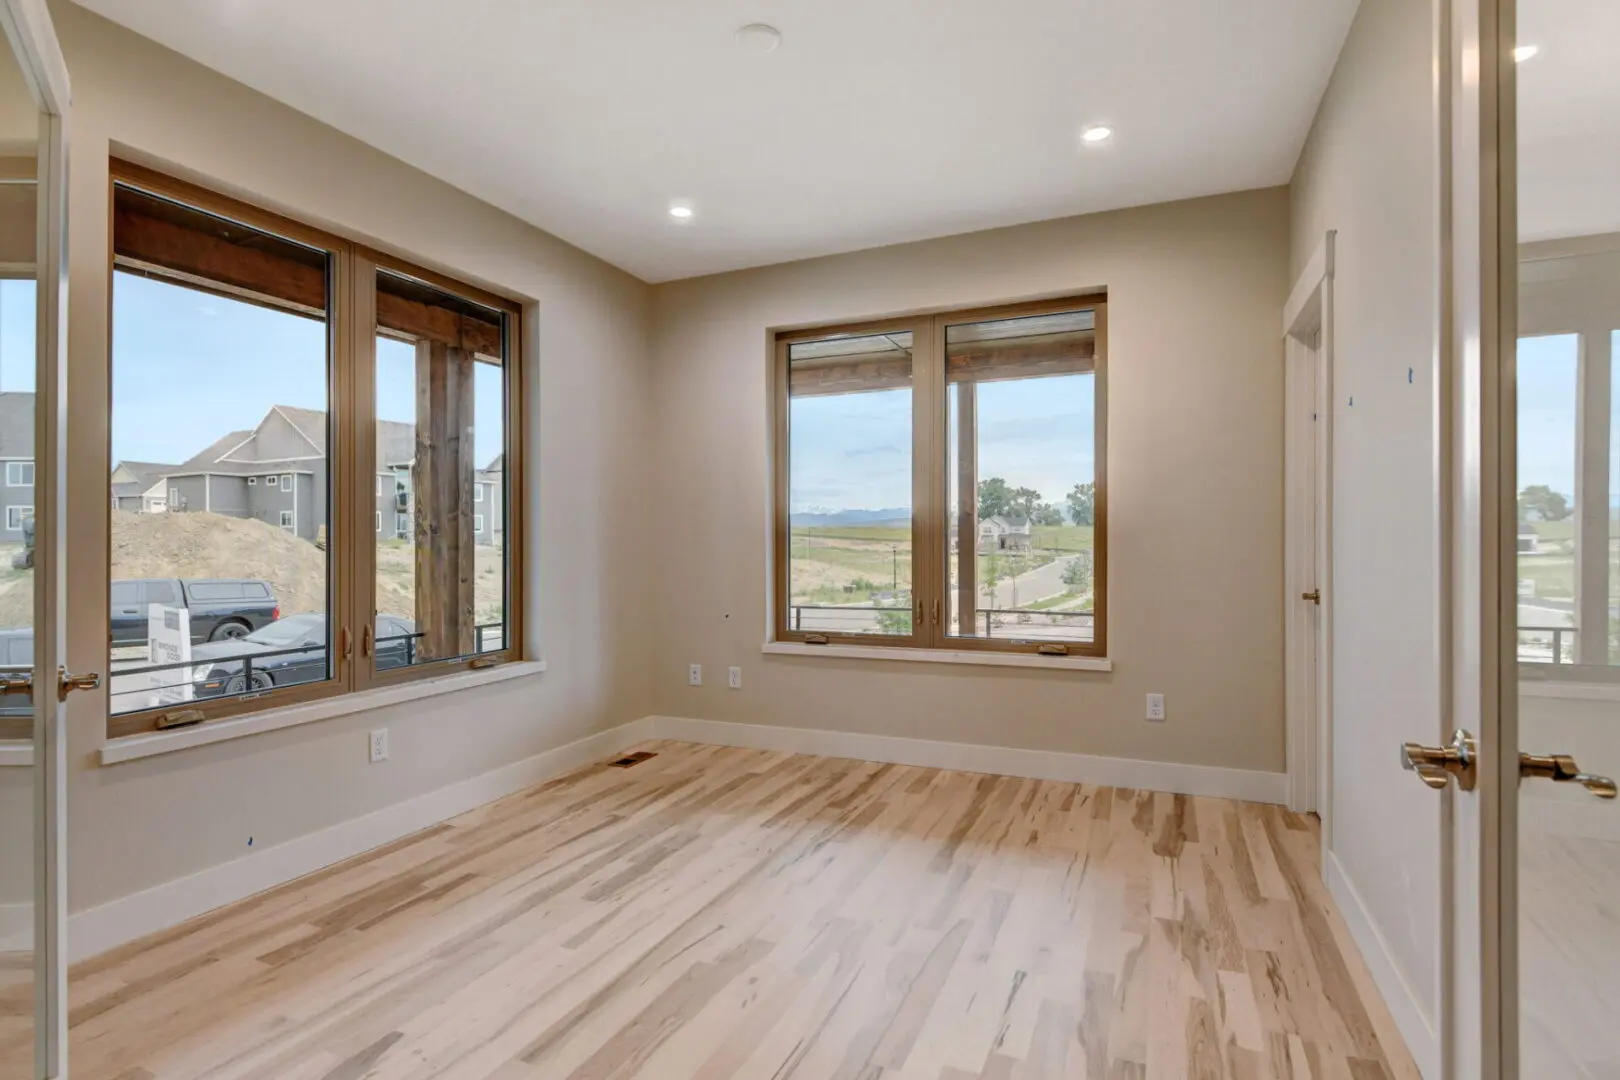 An empty room with windows and wooden floors